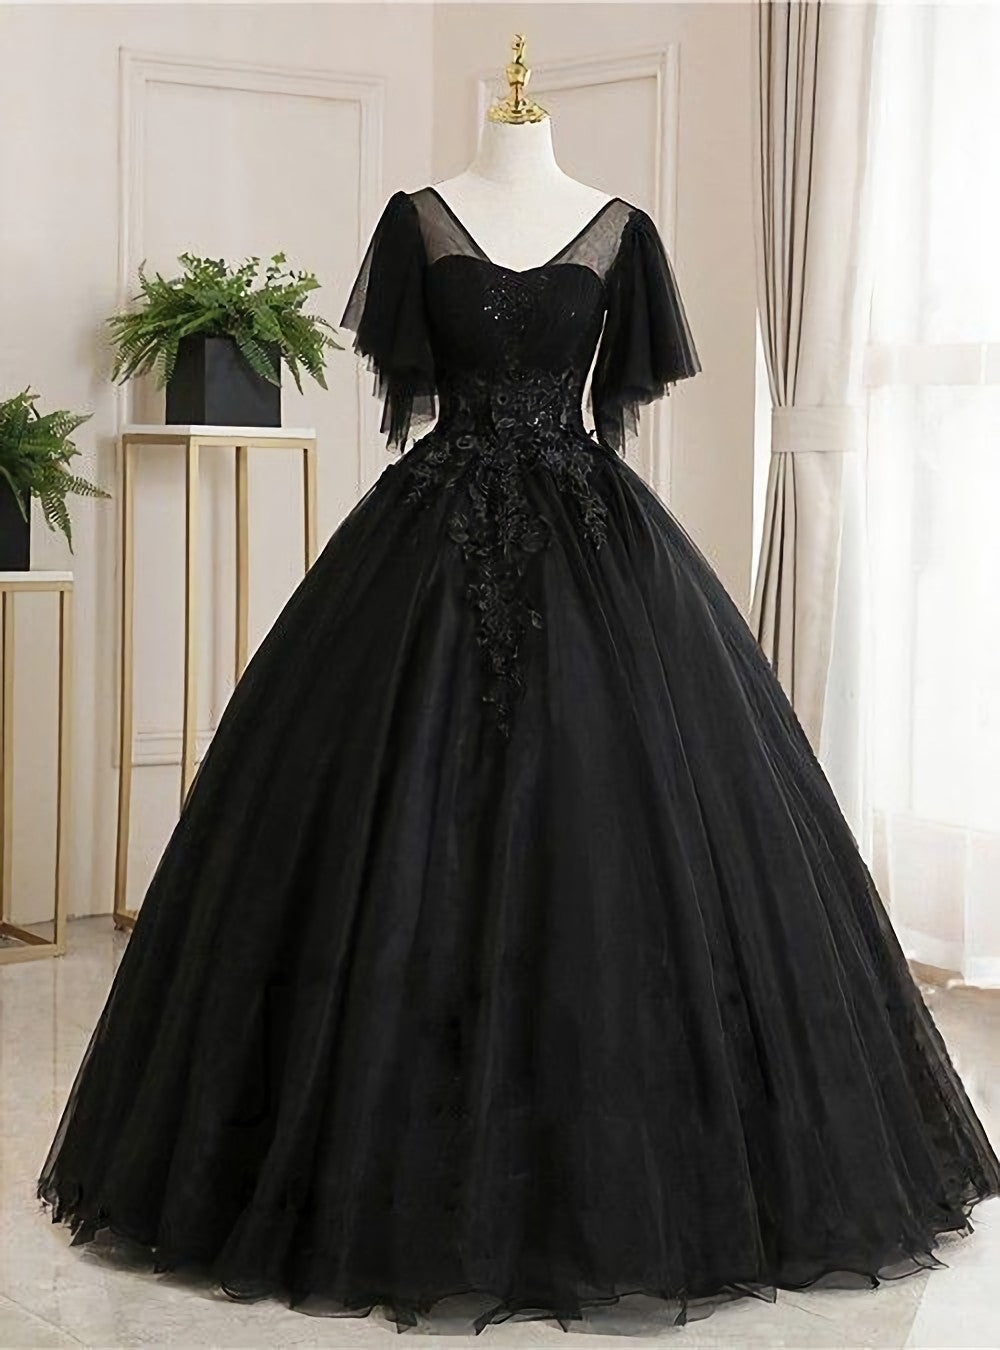 Ball Gown Luxurious Floral Quinceanera Corset Prom Dress, Scoop Neck Short Sleeve Floor Length Tulle With Pleats Embroidery Gowns, Prom Dresses A Line